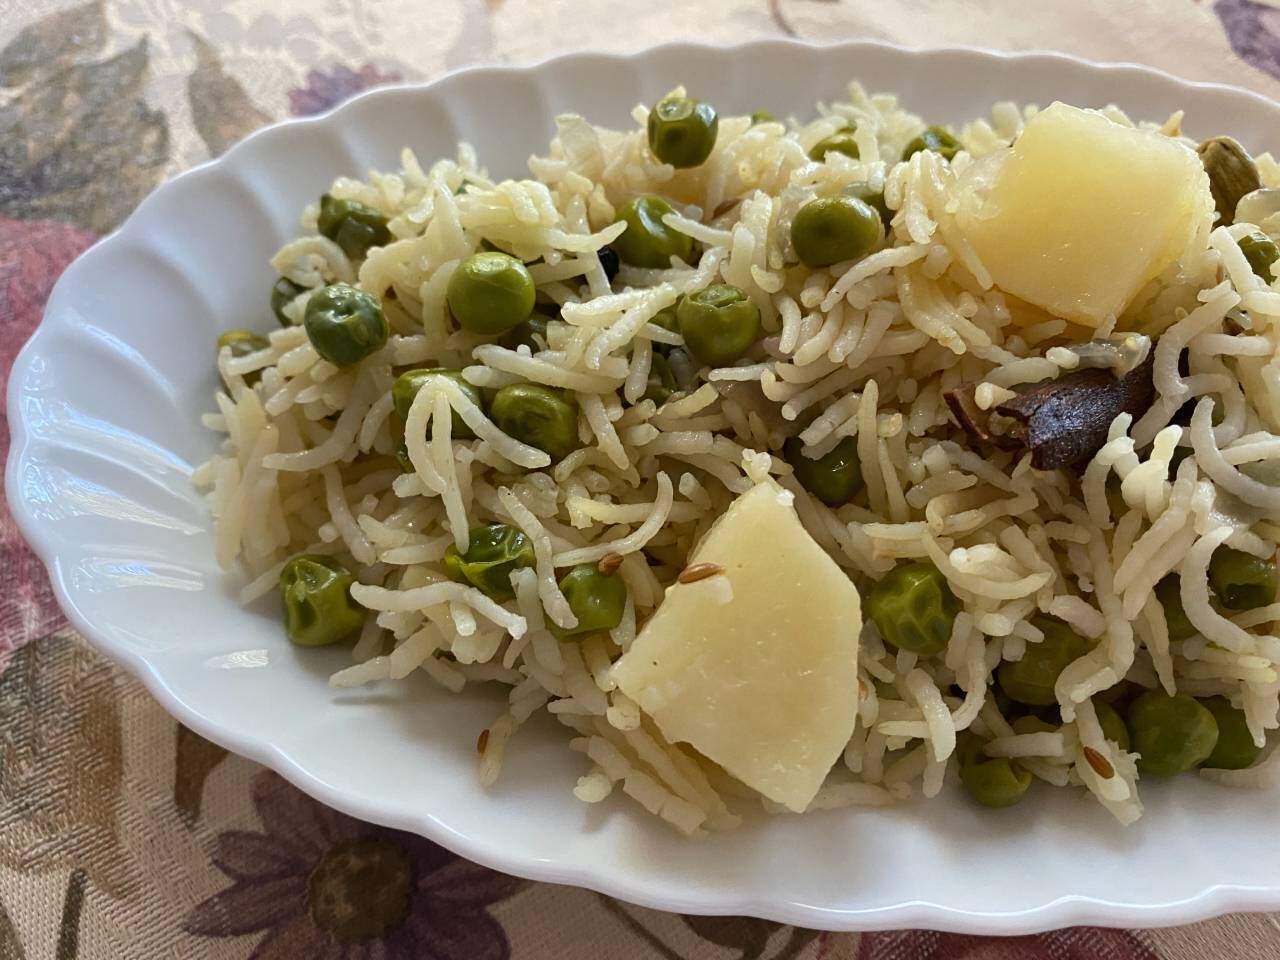 Matar Pulao - Rice, Peas, Potatoes, Flavorful Warm Spices